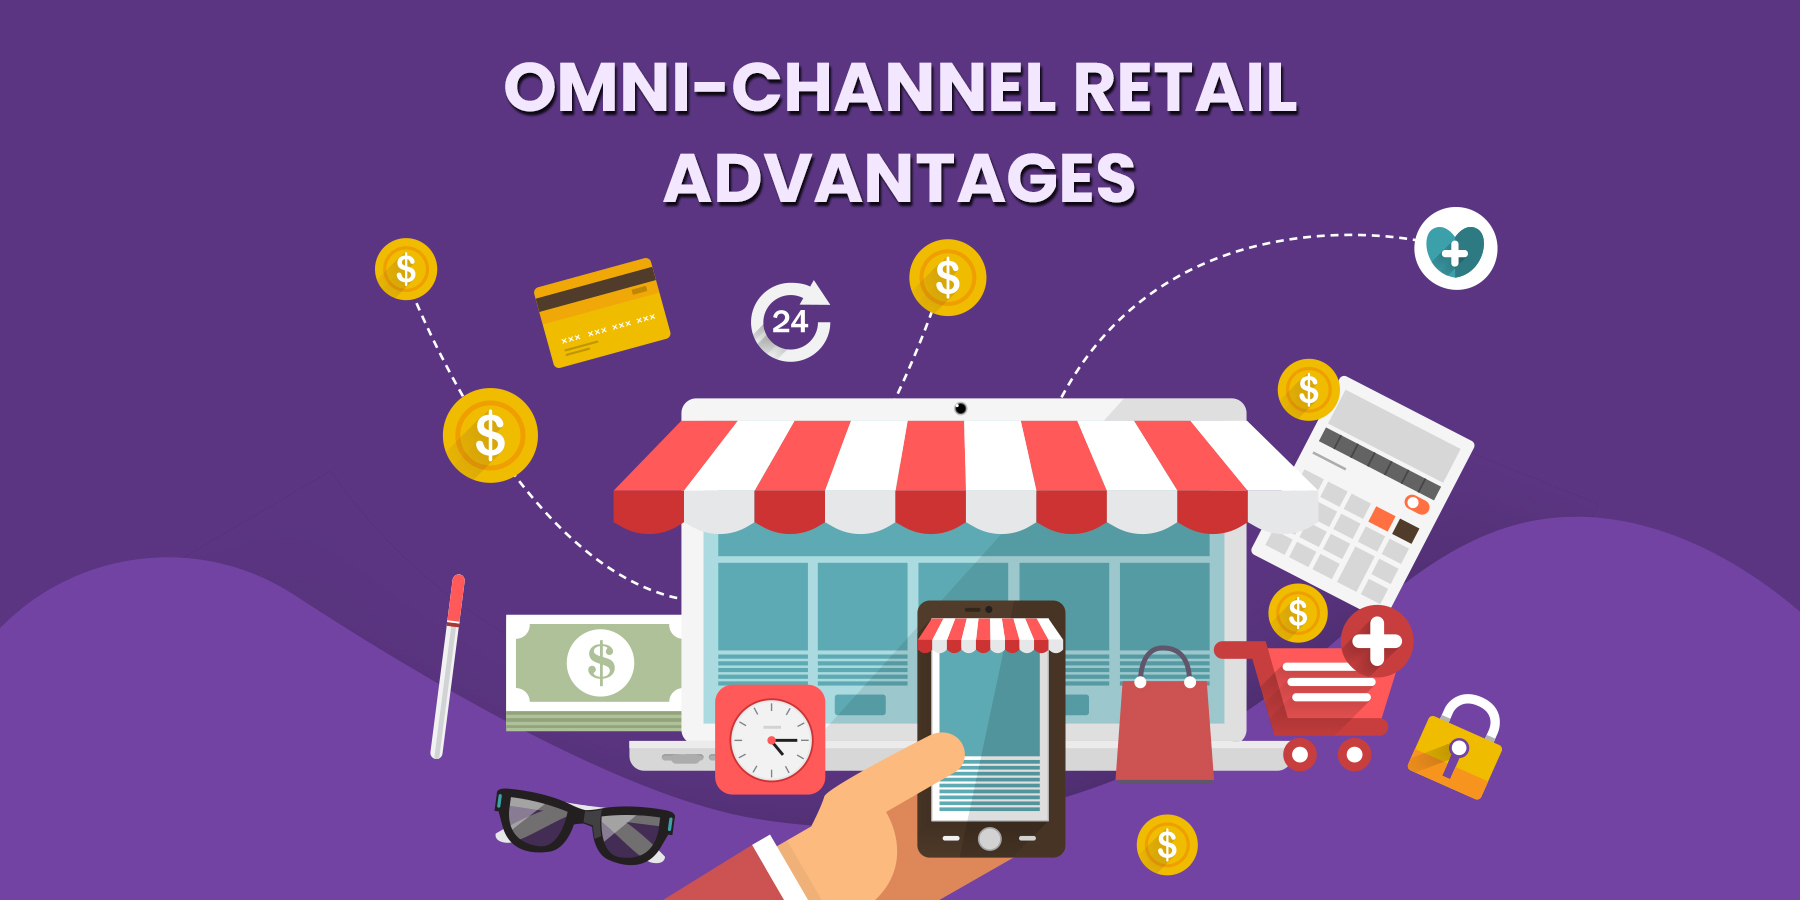 Amazon Omnichannel Retail Is The Key To Success In The Ecommerce Industry